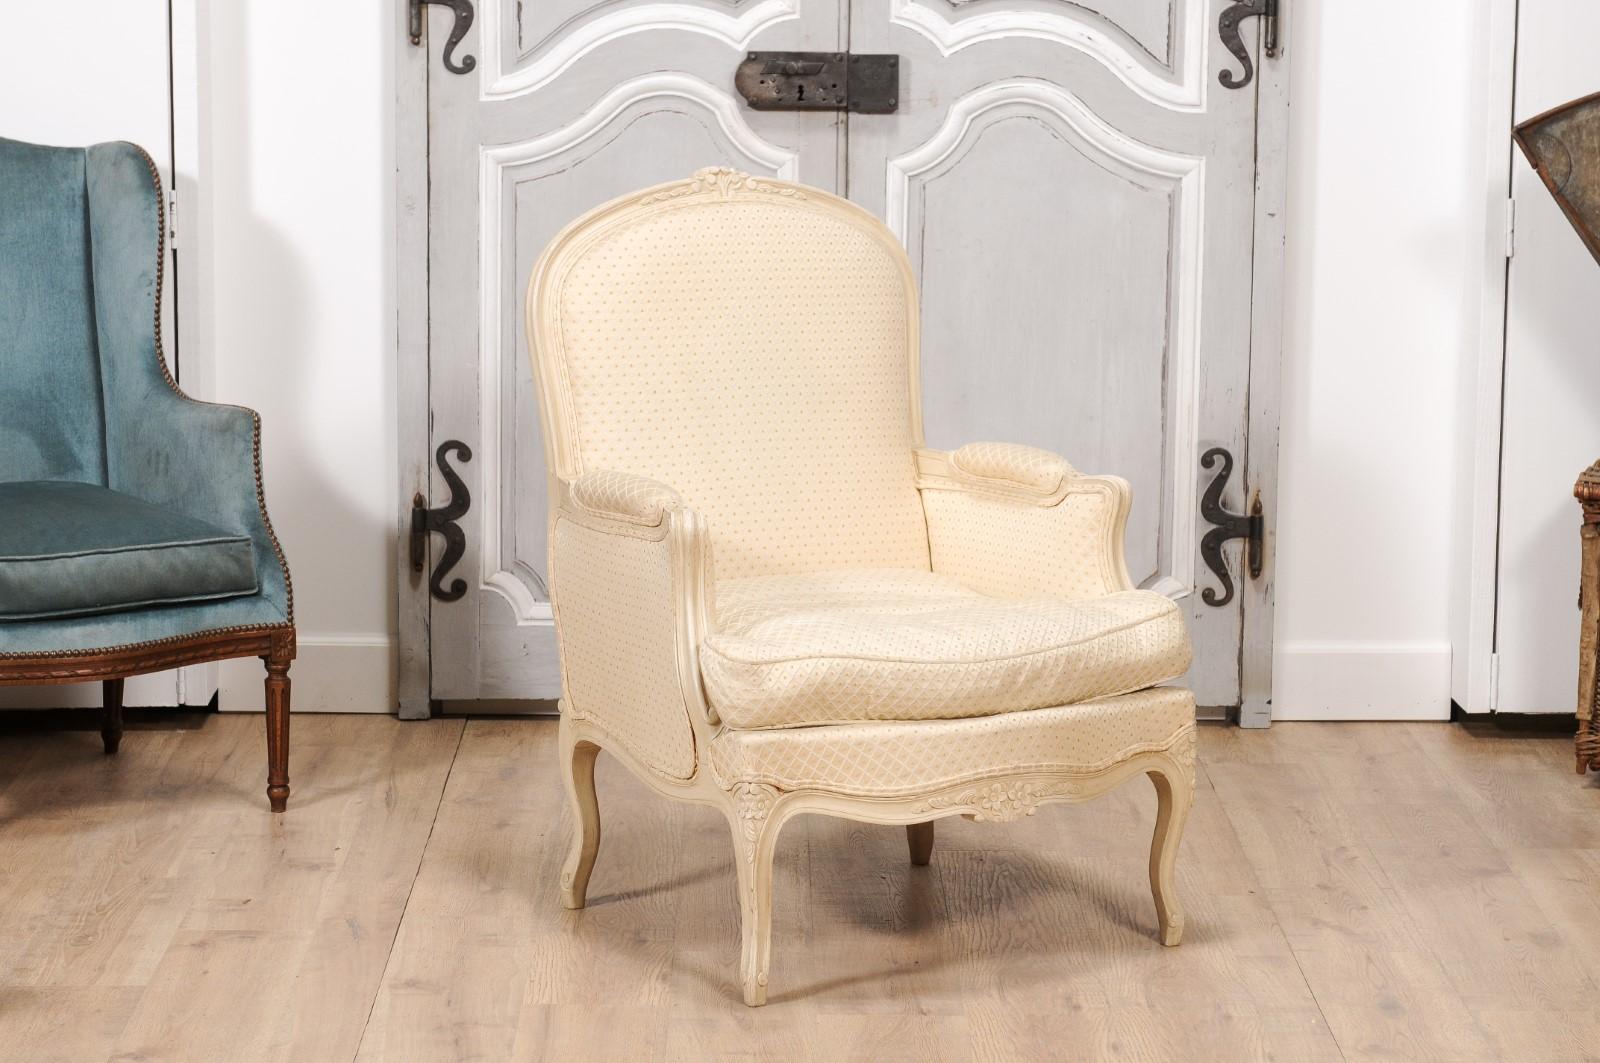 A pair of French Louis XV style bergères chairs from the 20th century with cream painted finish, floral carved crest, knees and apron, and cabriole legs. Exuding timeless elegance, this pair of French Louis XV style bergères chairs from the 20th